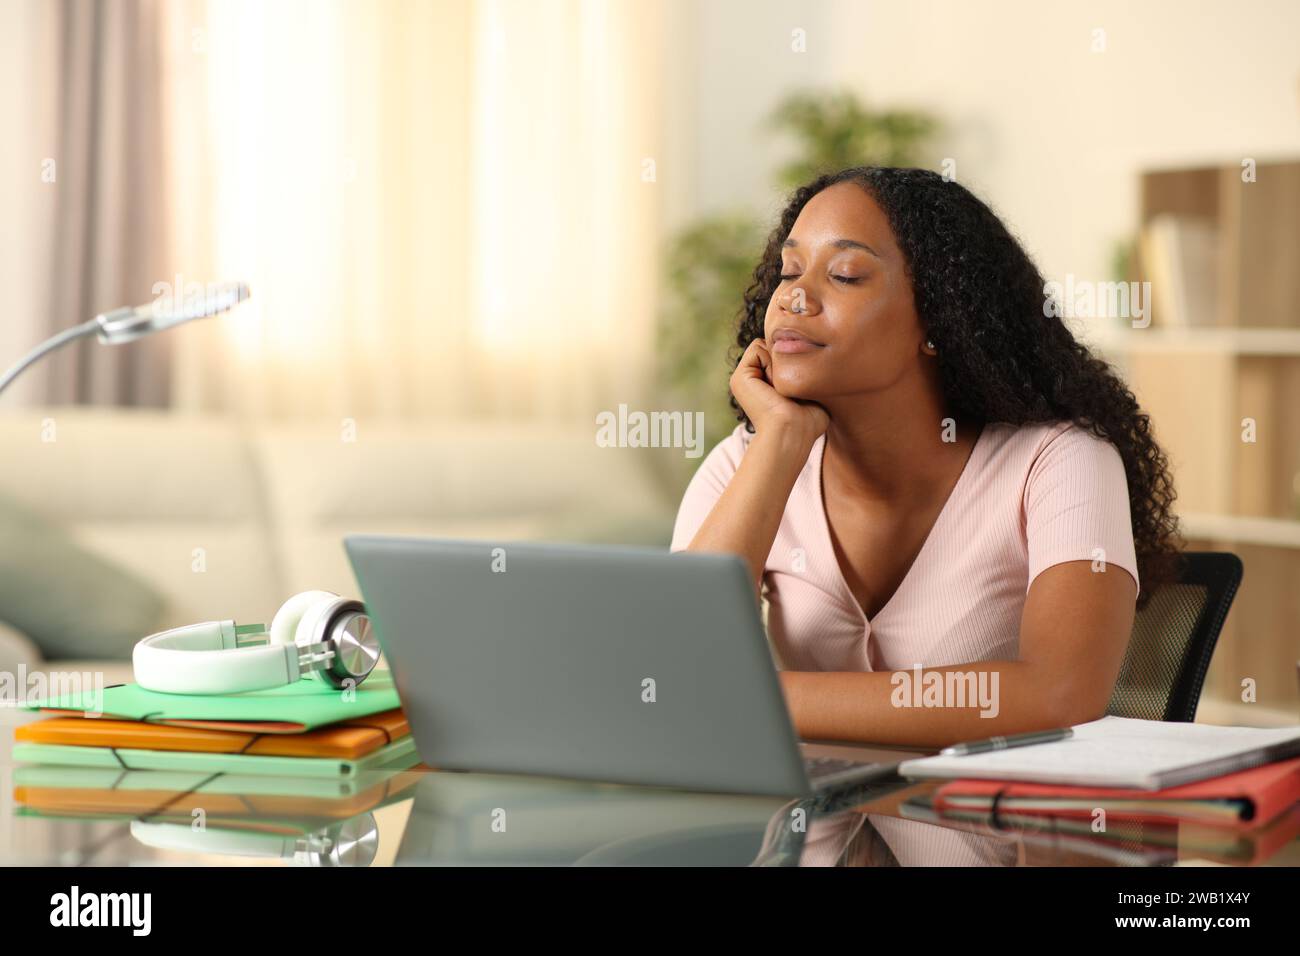 Black student relaxing at home relieving stress Stock Photo